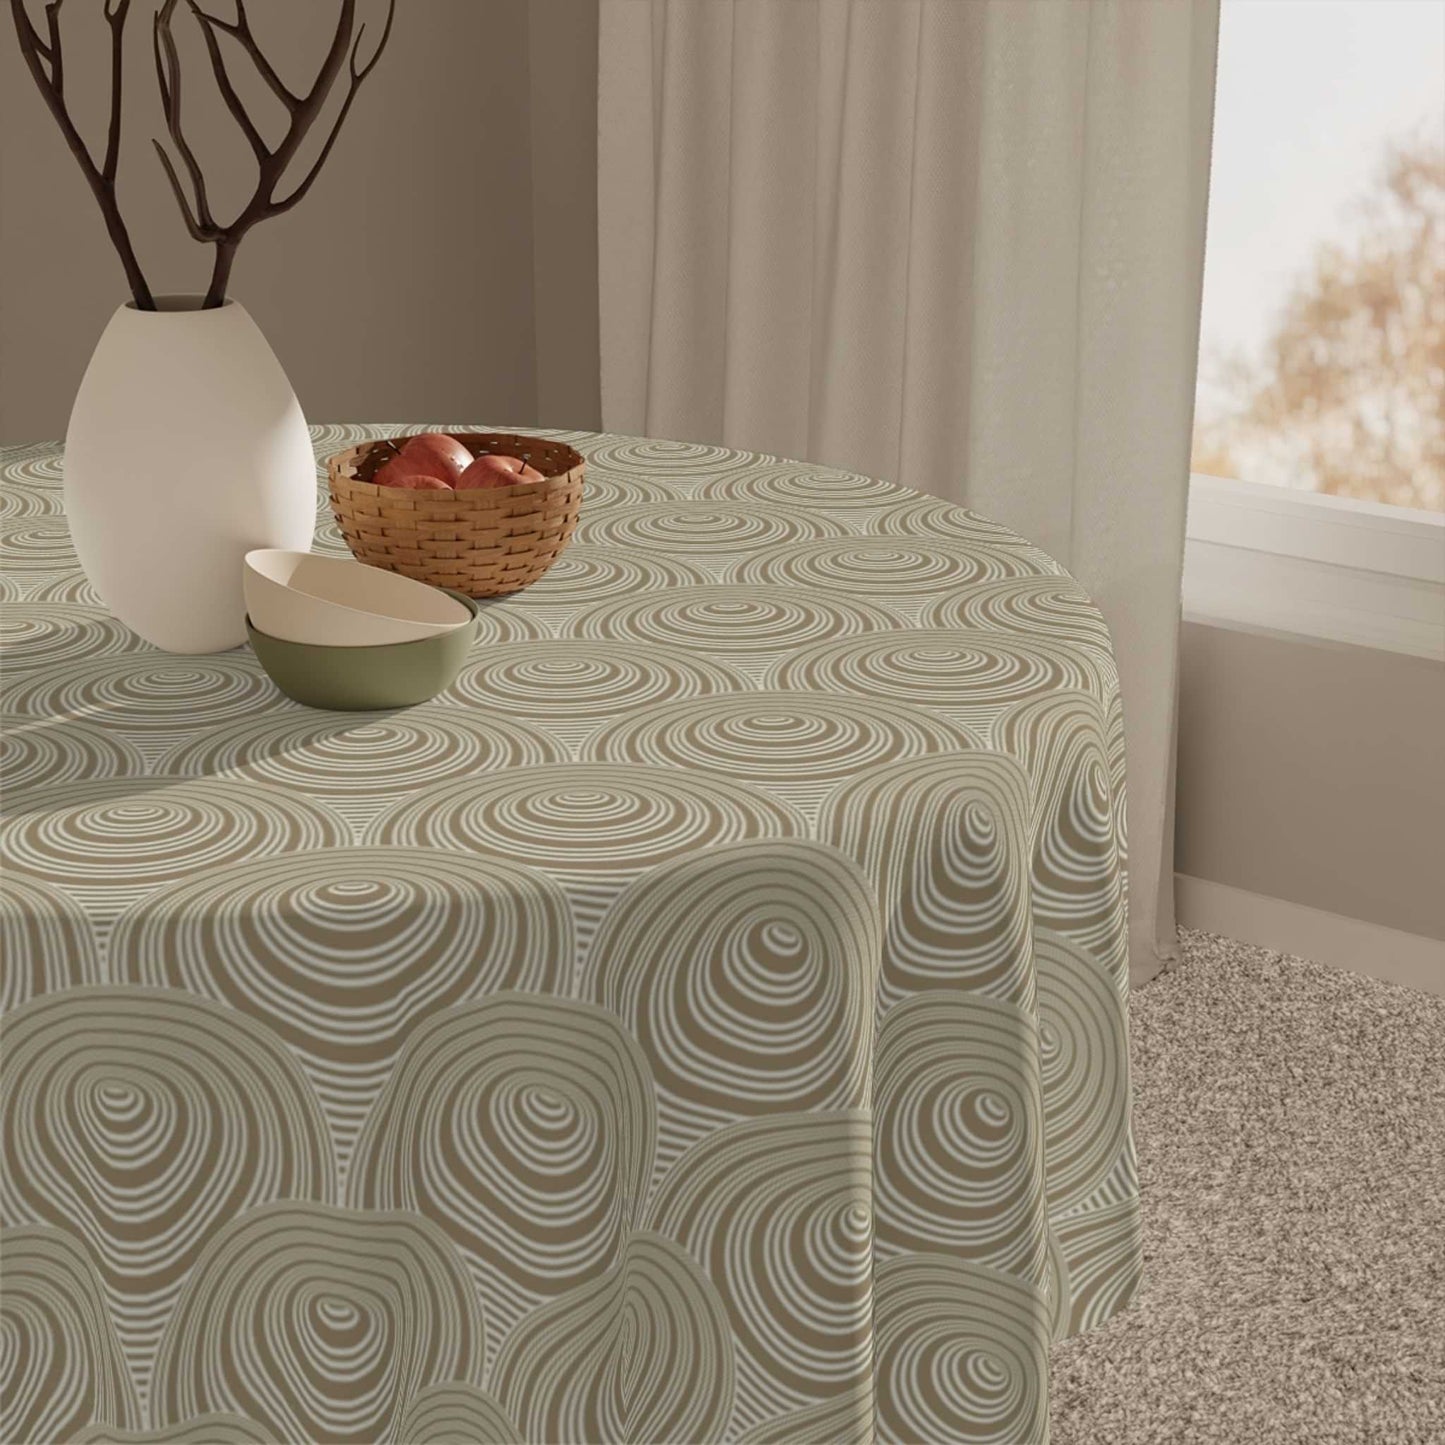 Geo Circles Gold Tablecloth - ZumBuys